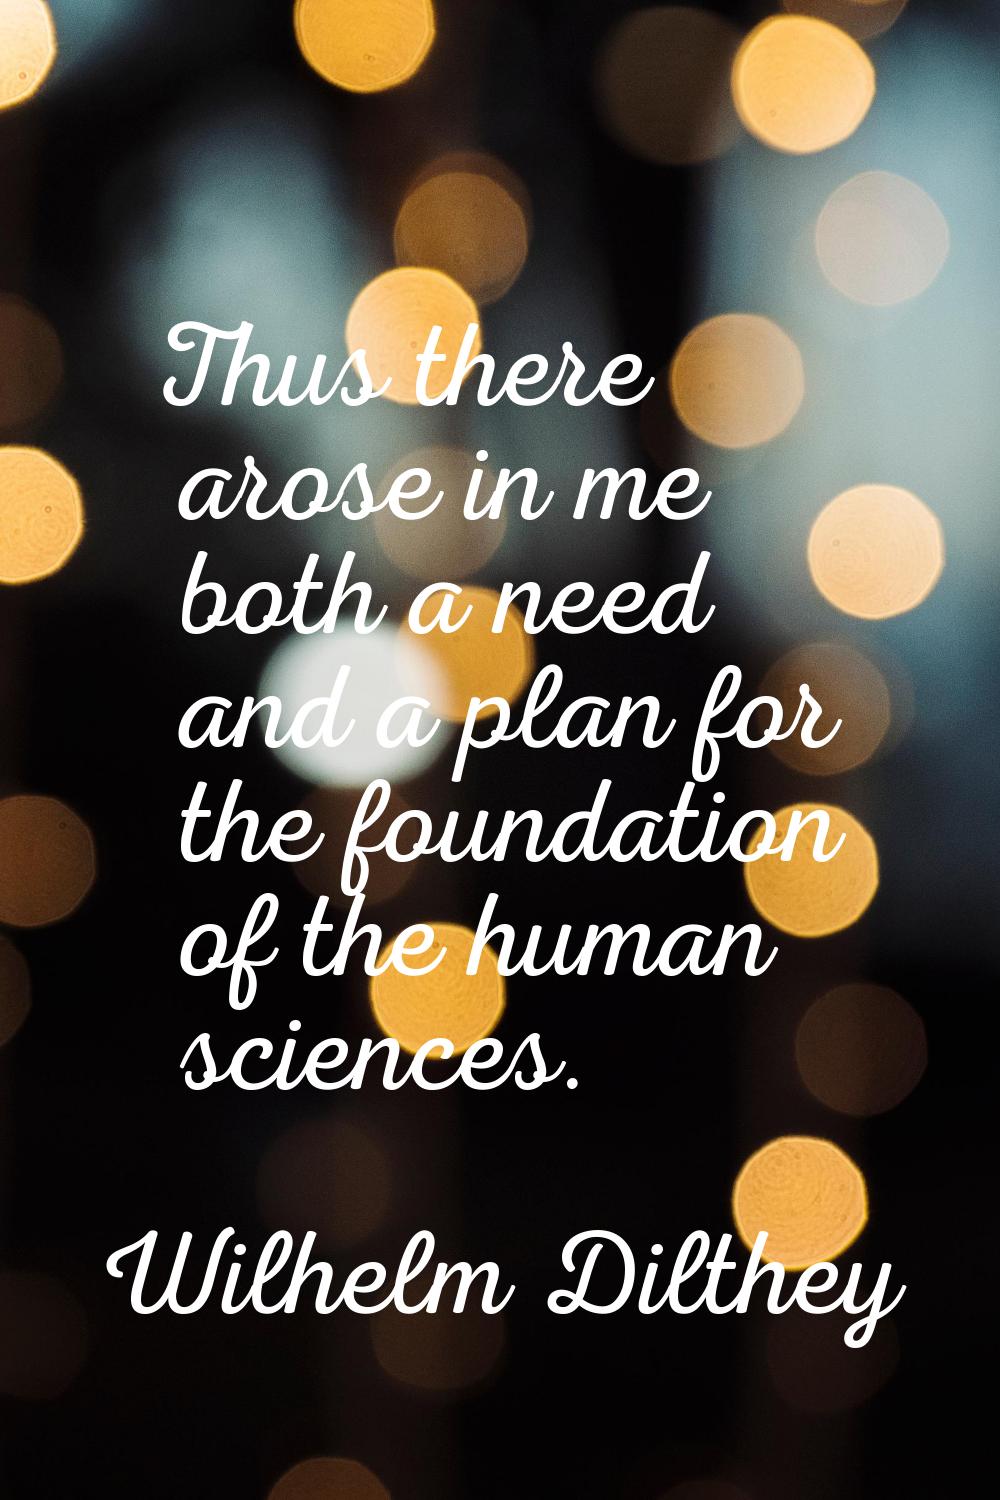 Thus there arose in me both a need and a plan for the foundation of the human sciences.